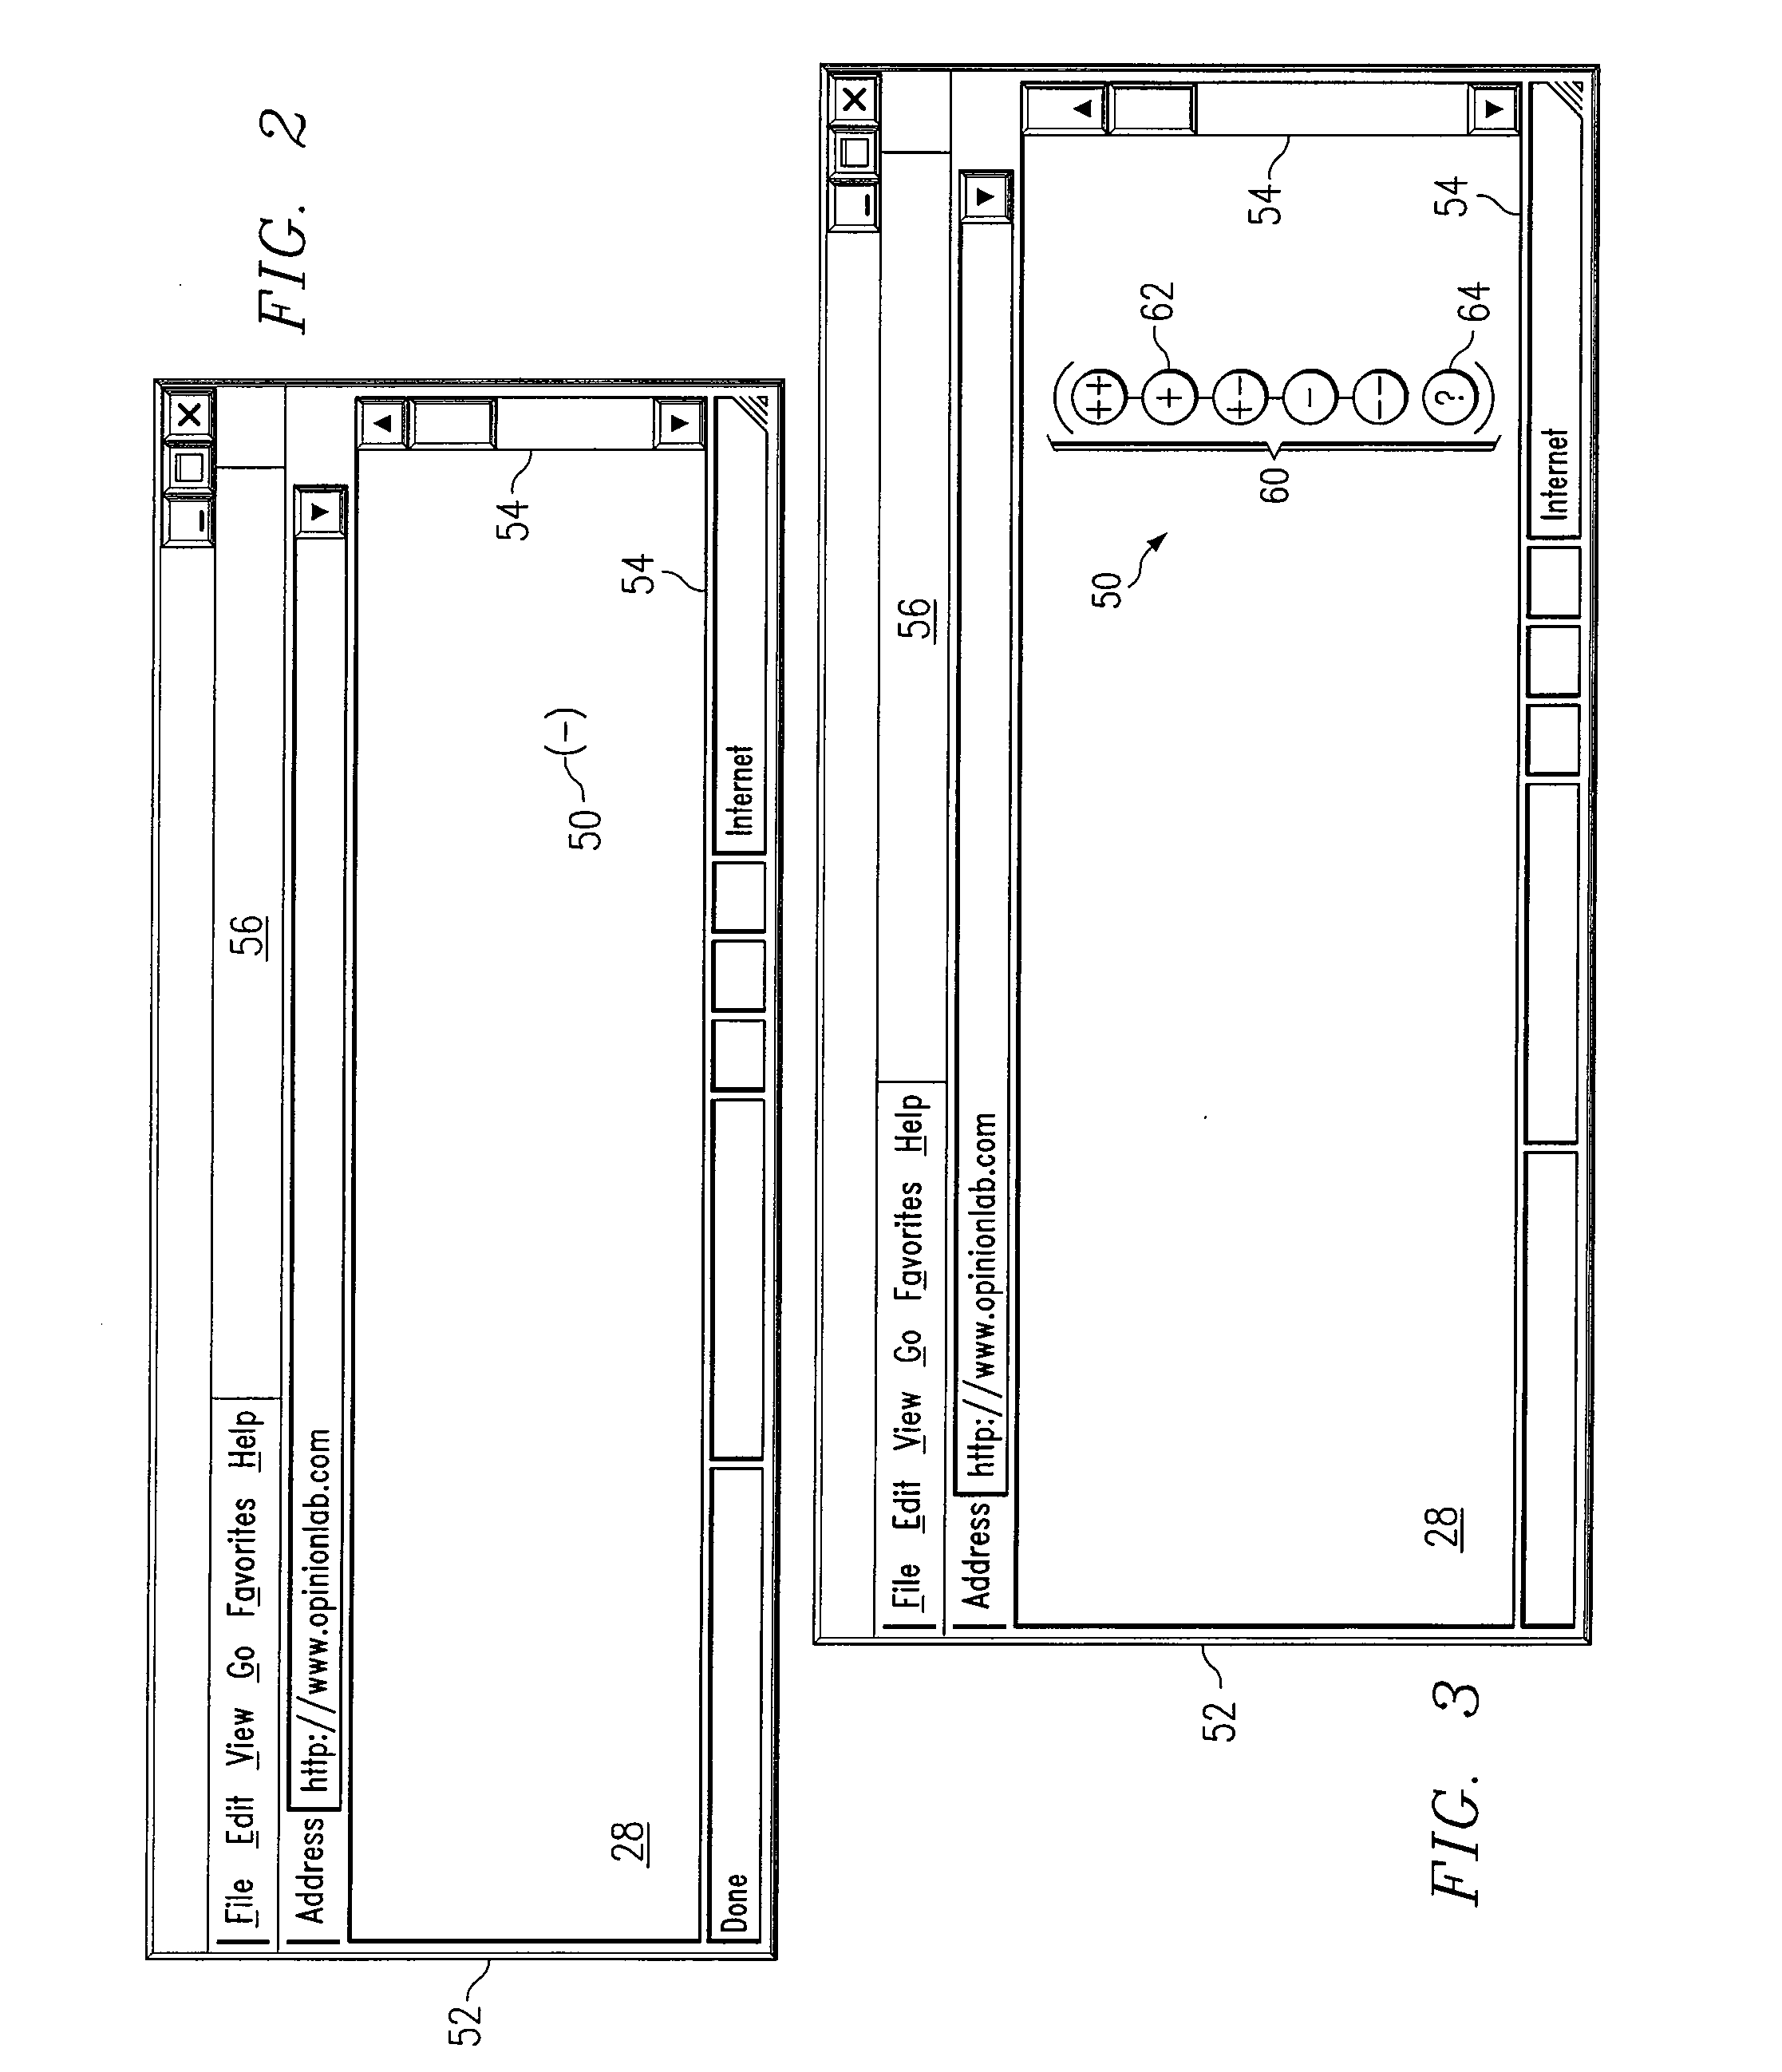 System and Method for Reporting to a Website Owner User Reactions to Particular Web Pages of a Website